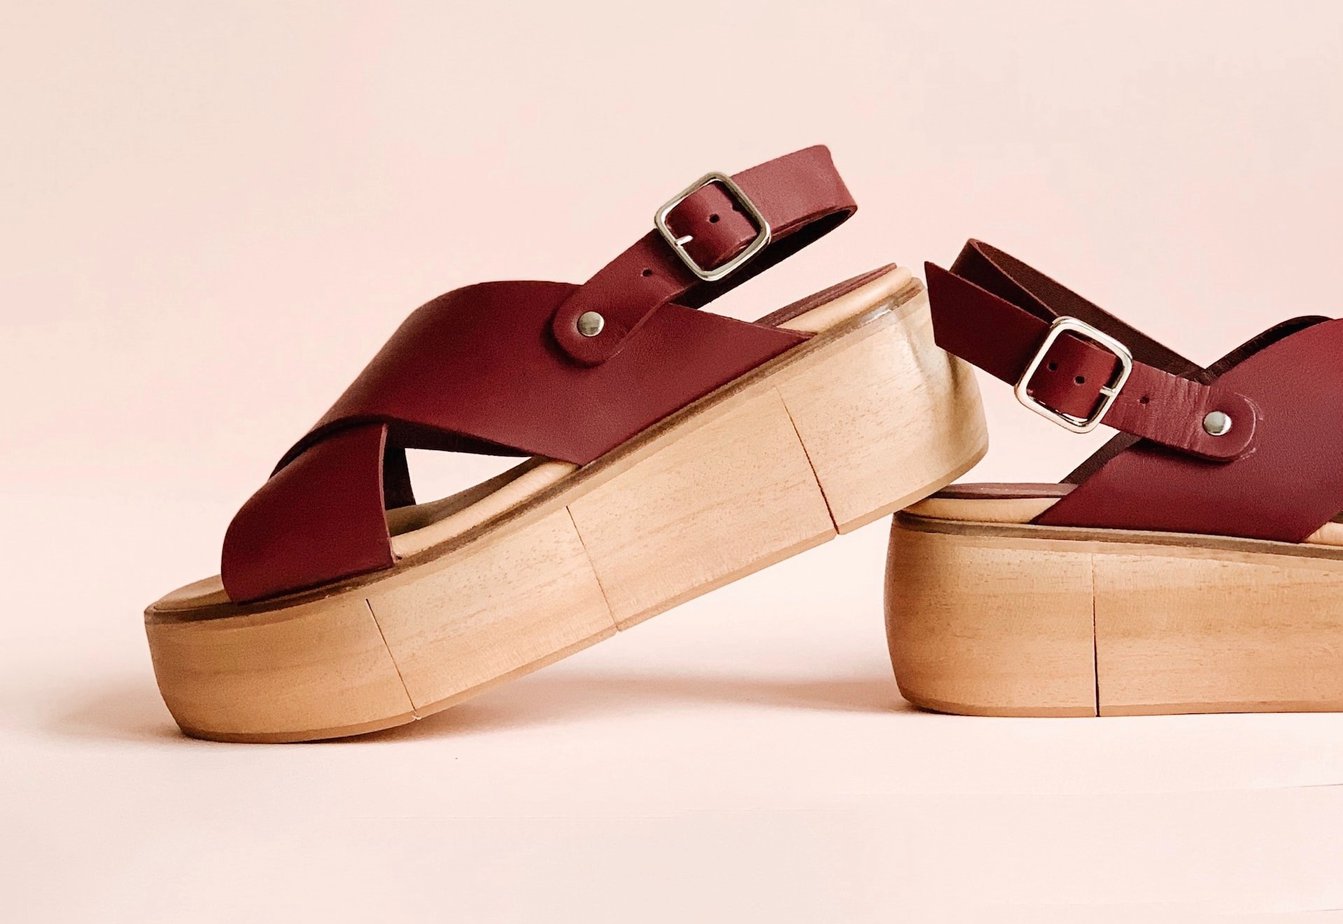 Platform sandals – how to style them for work?